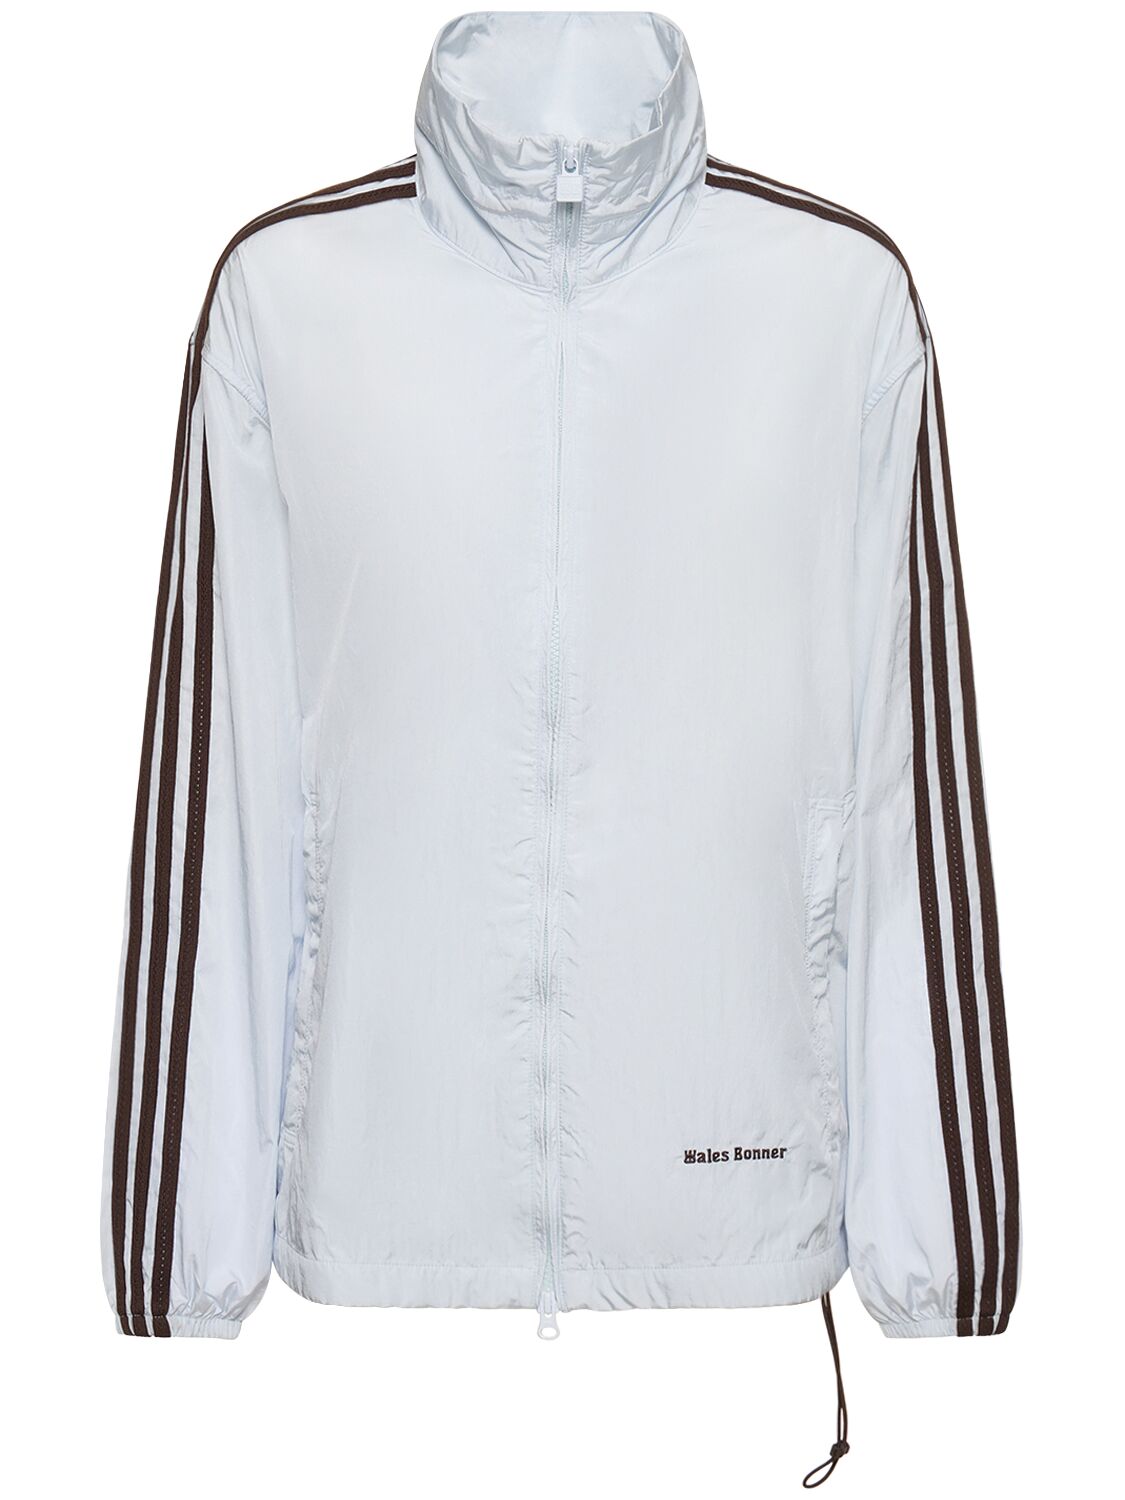 ADIDAS ORIGINALS WALES BONNER RECYCLED TECH TRACK TOP